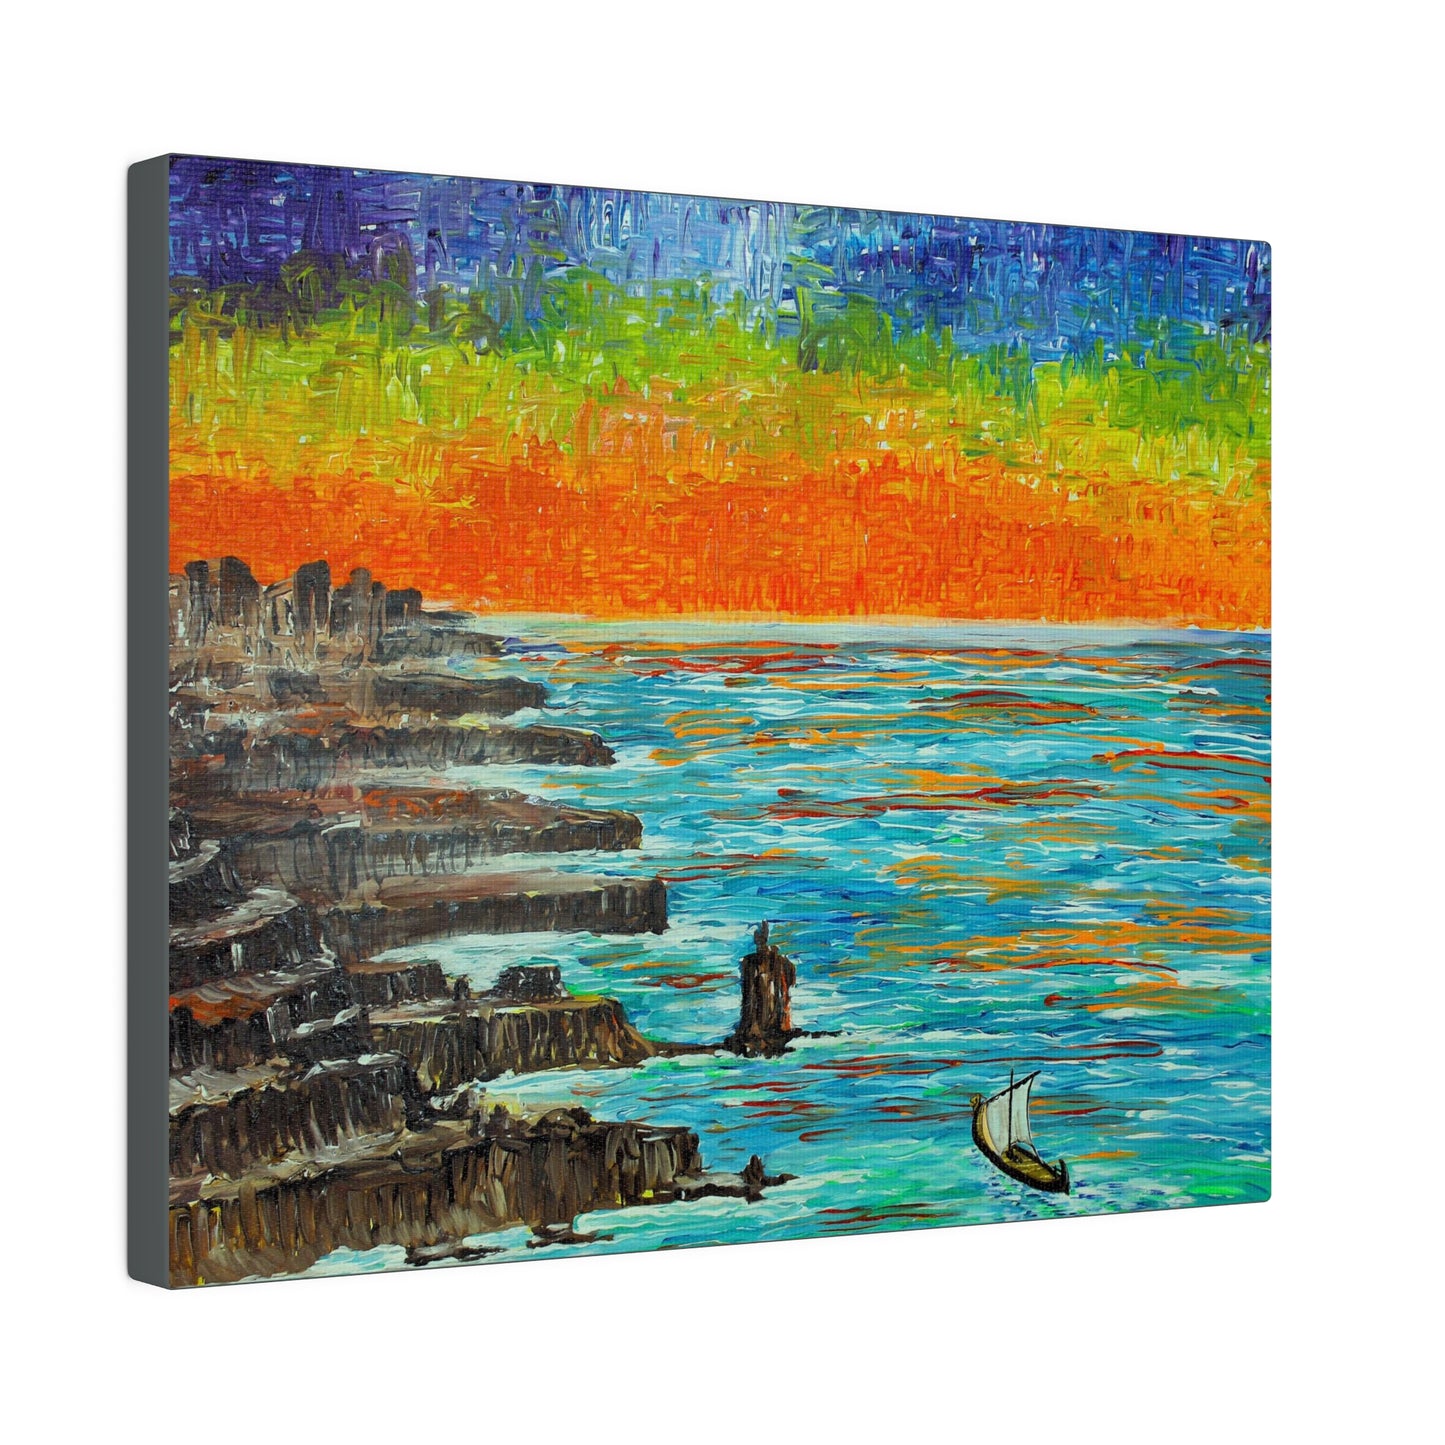 Sailing Boat at Sunset over Rocky Coast  on Canvas